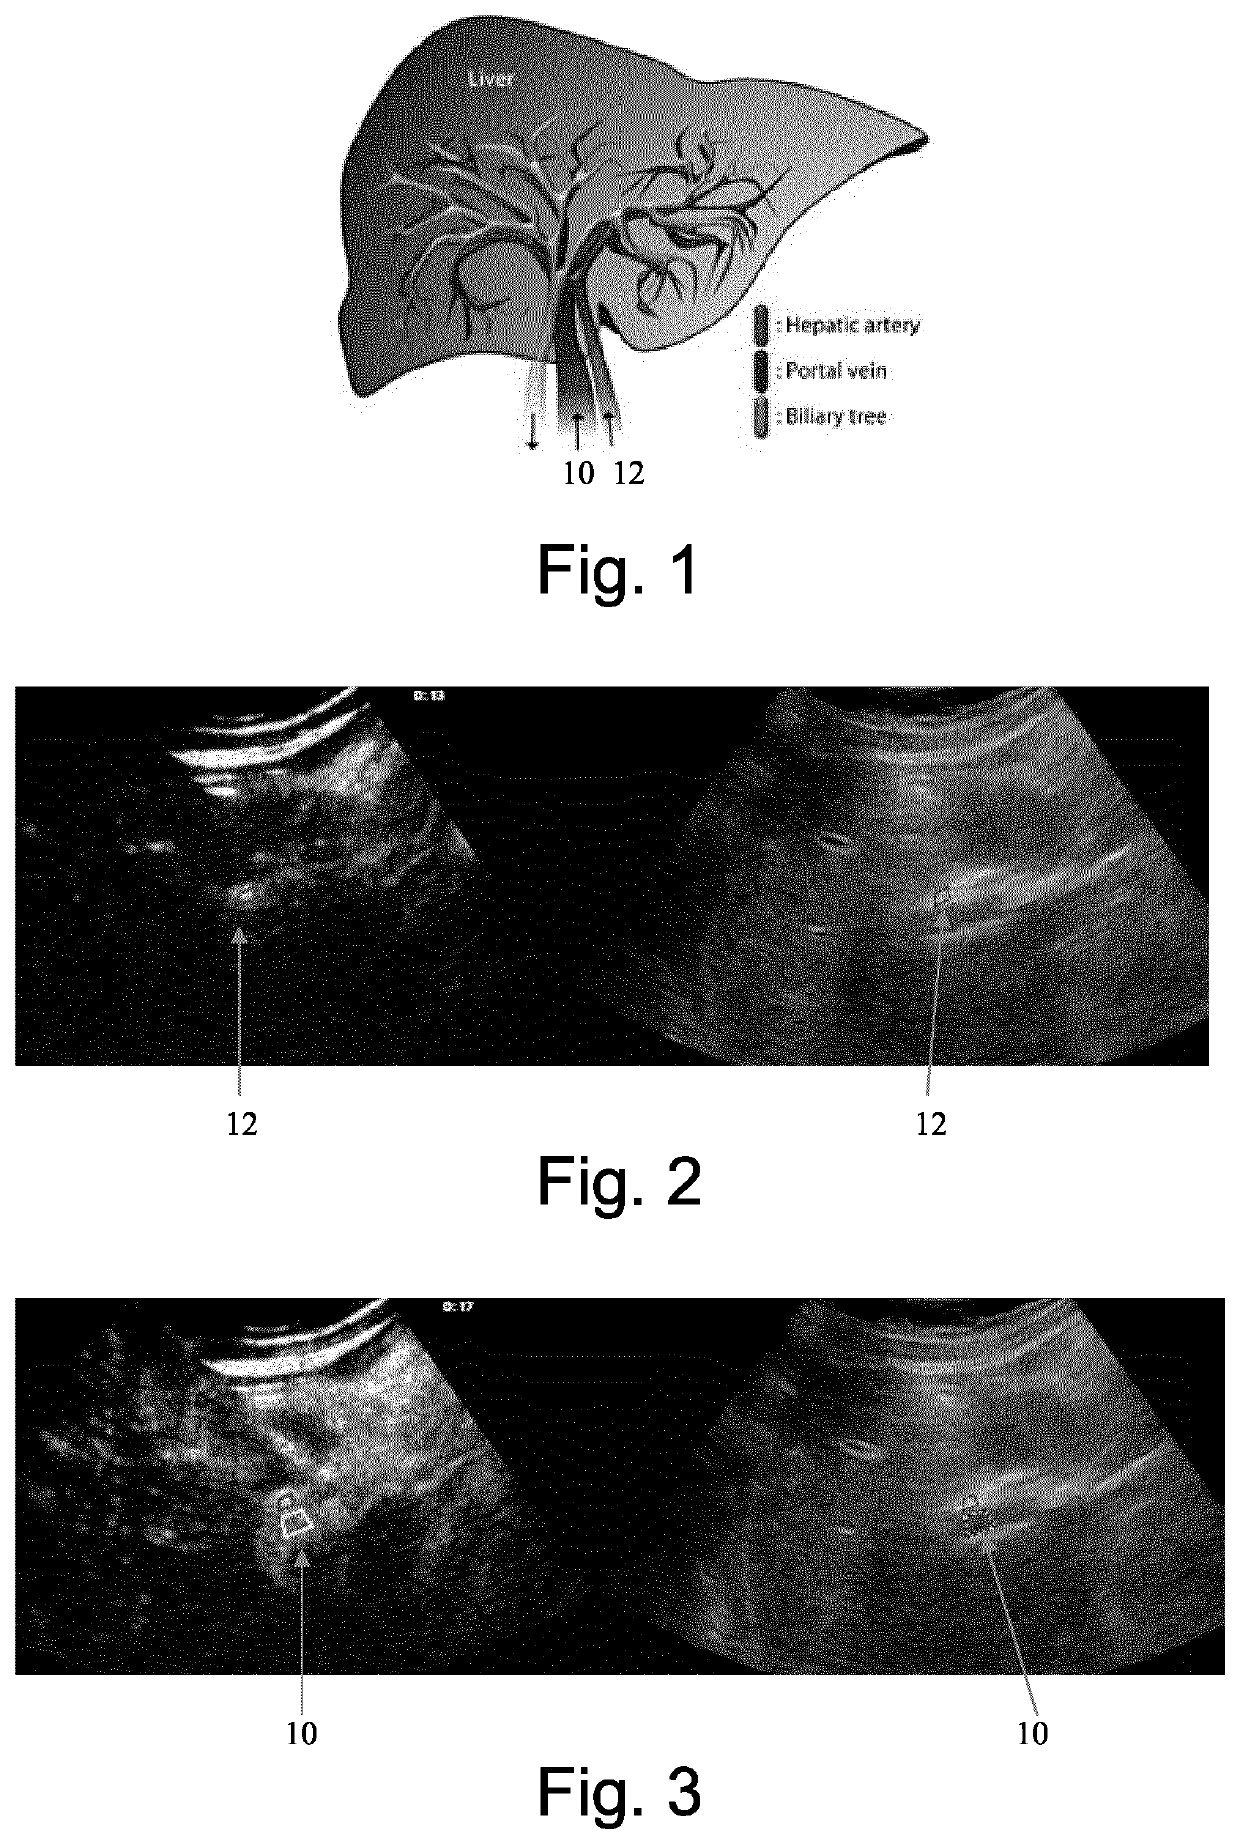 System and method for characterizing liver perfusion of contrast agent flow